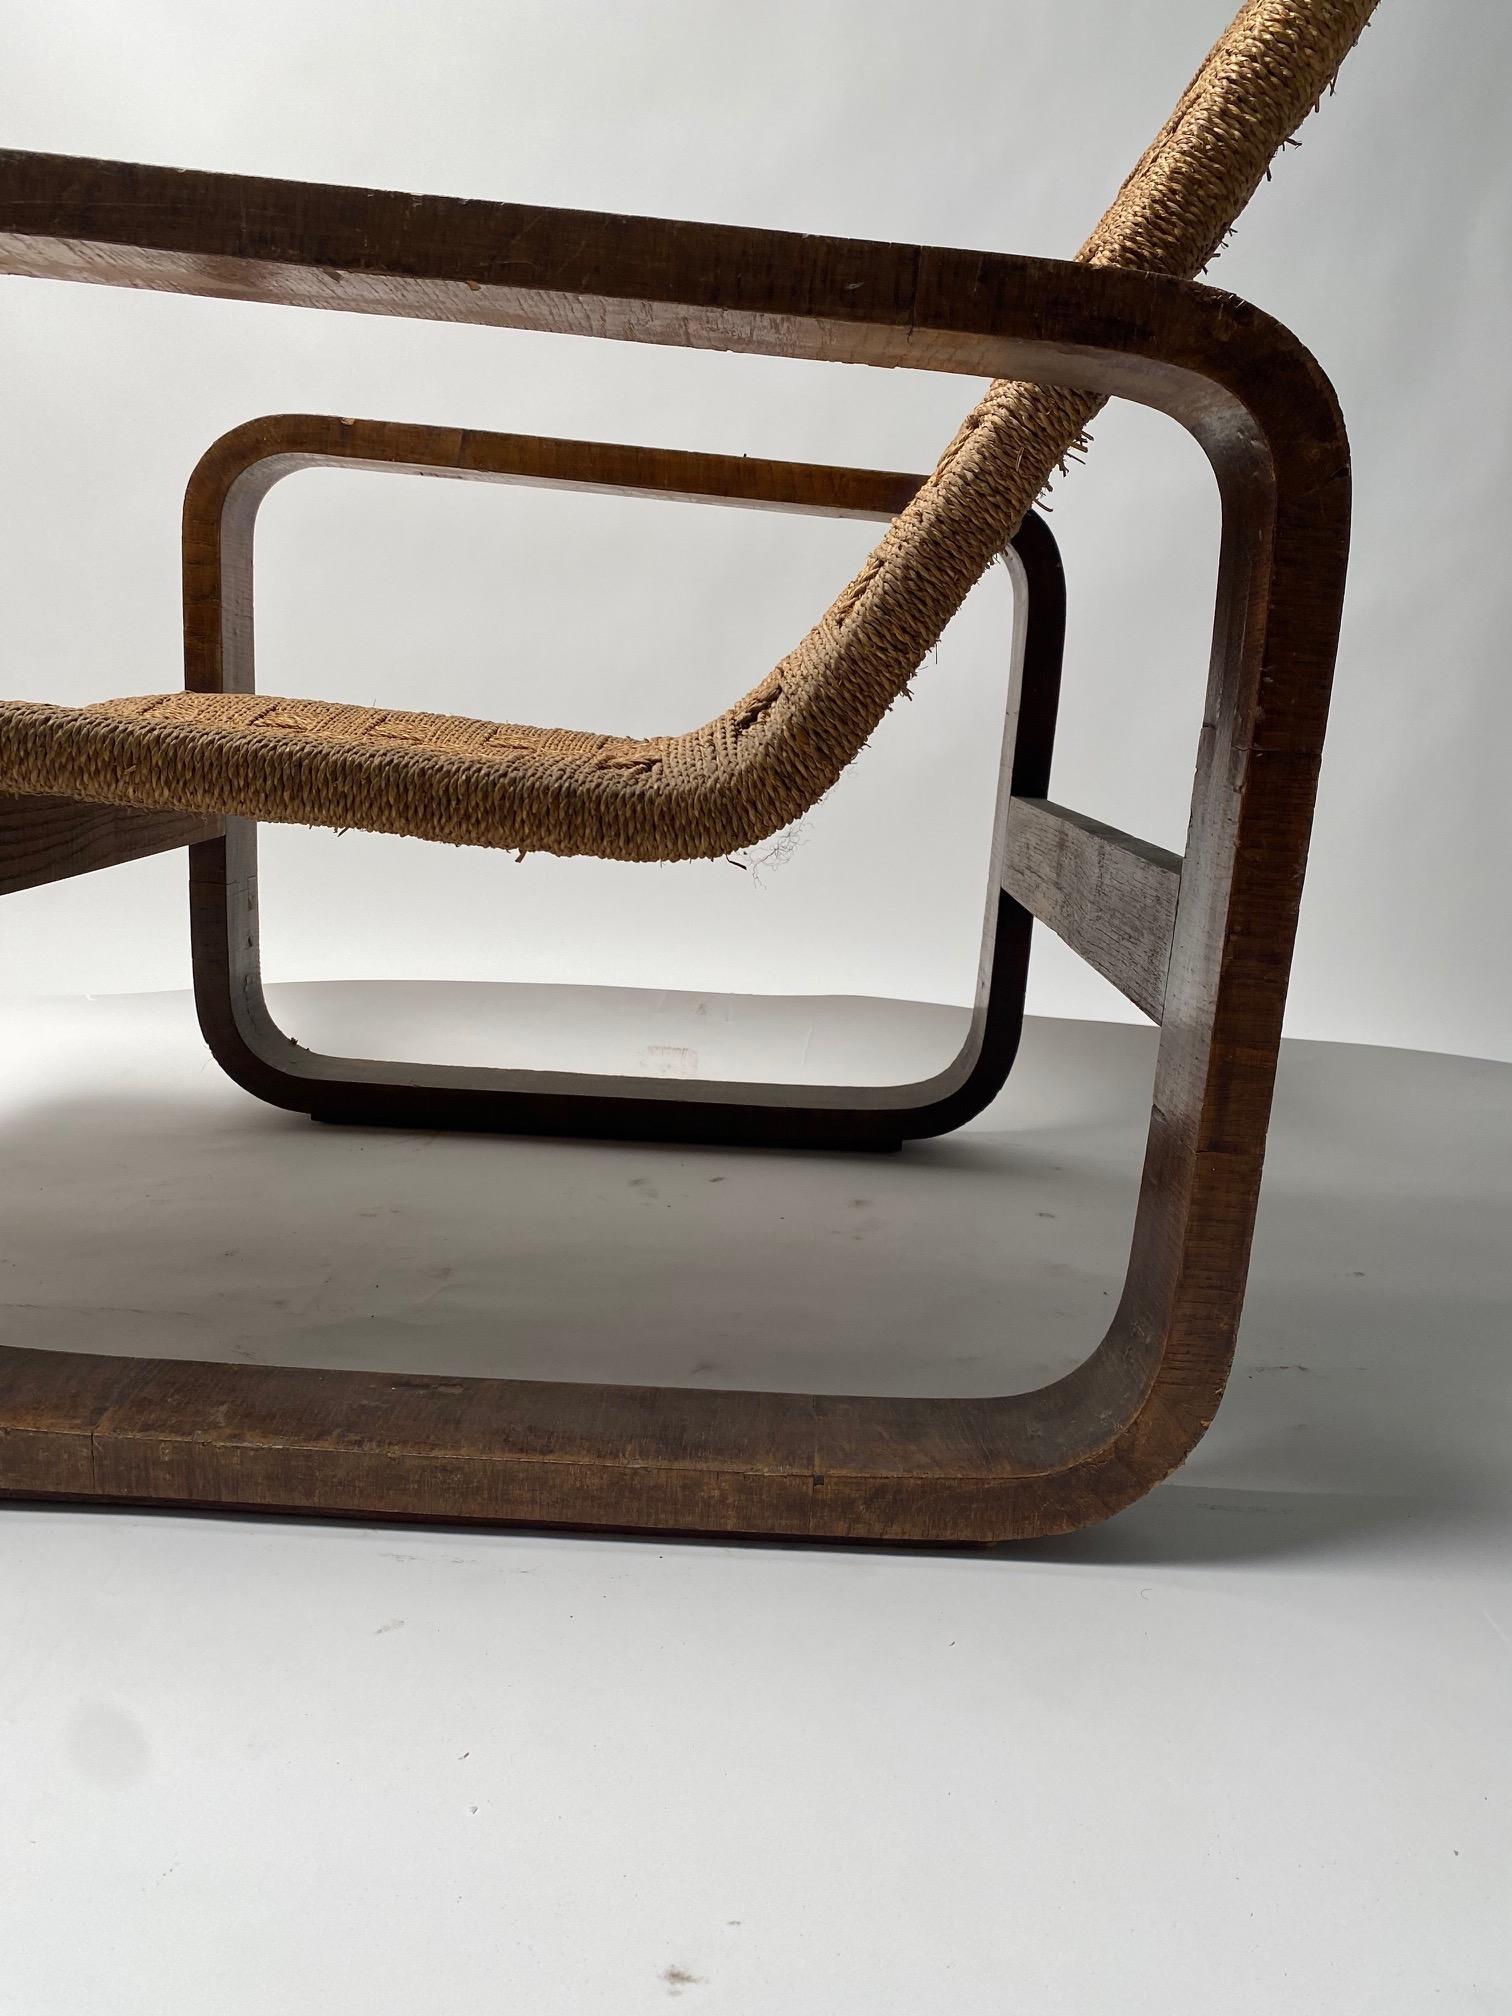 Italian Sculptural Armchair in wood and rope, Giuseppe Pagano (Attr), Italy, 1940s For Sale